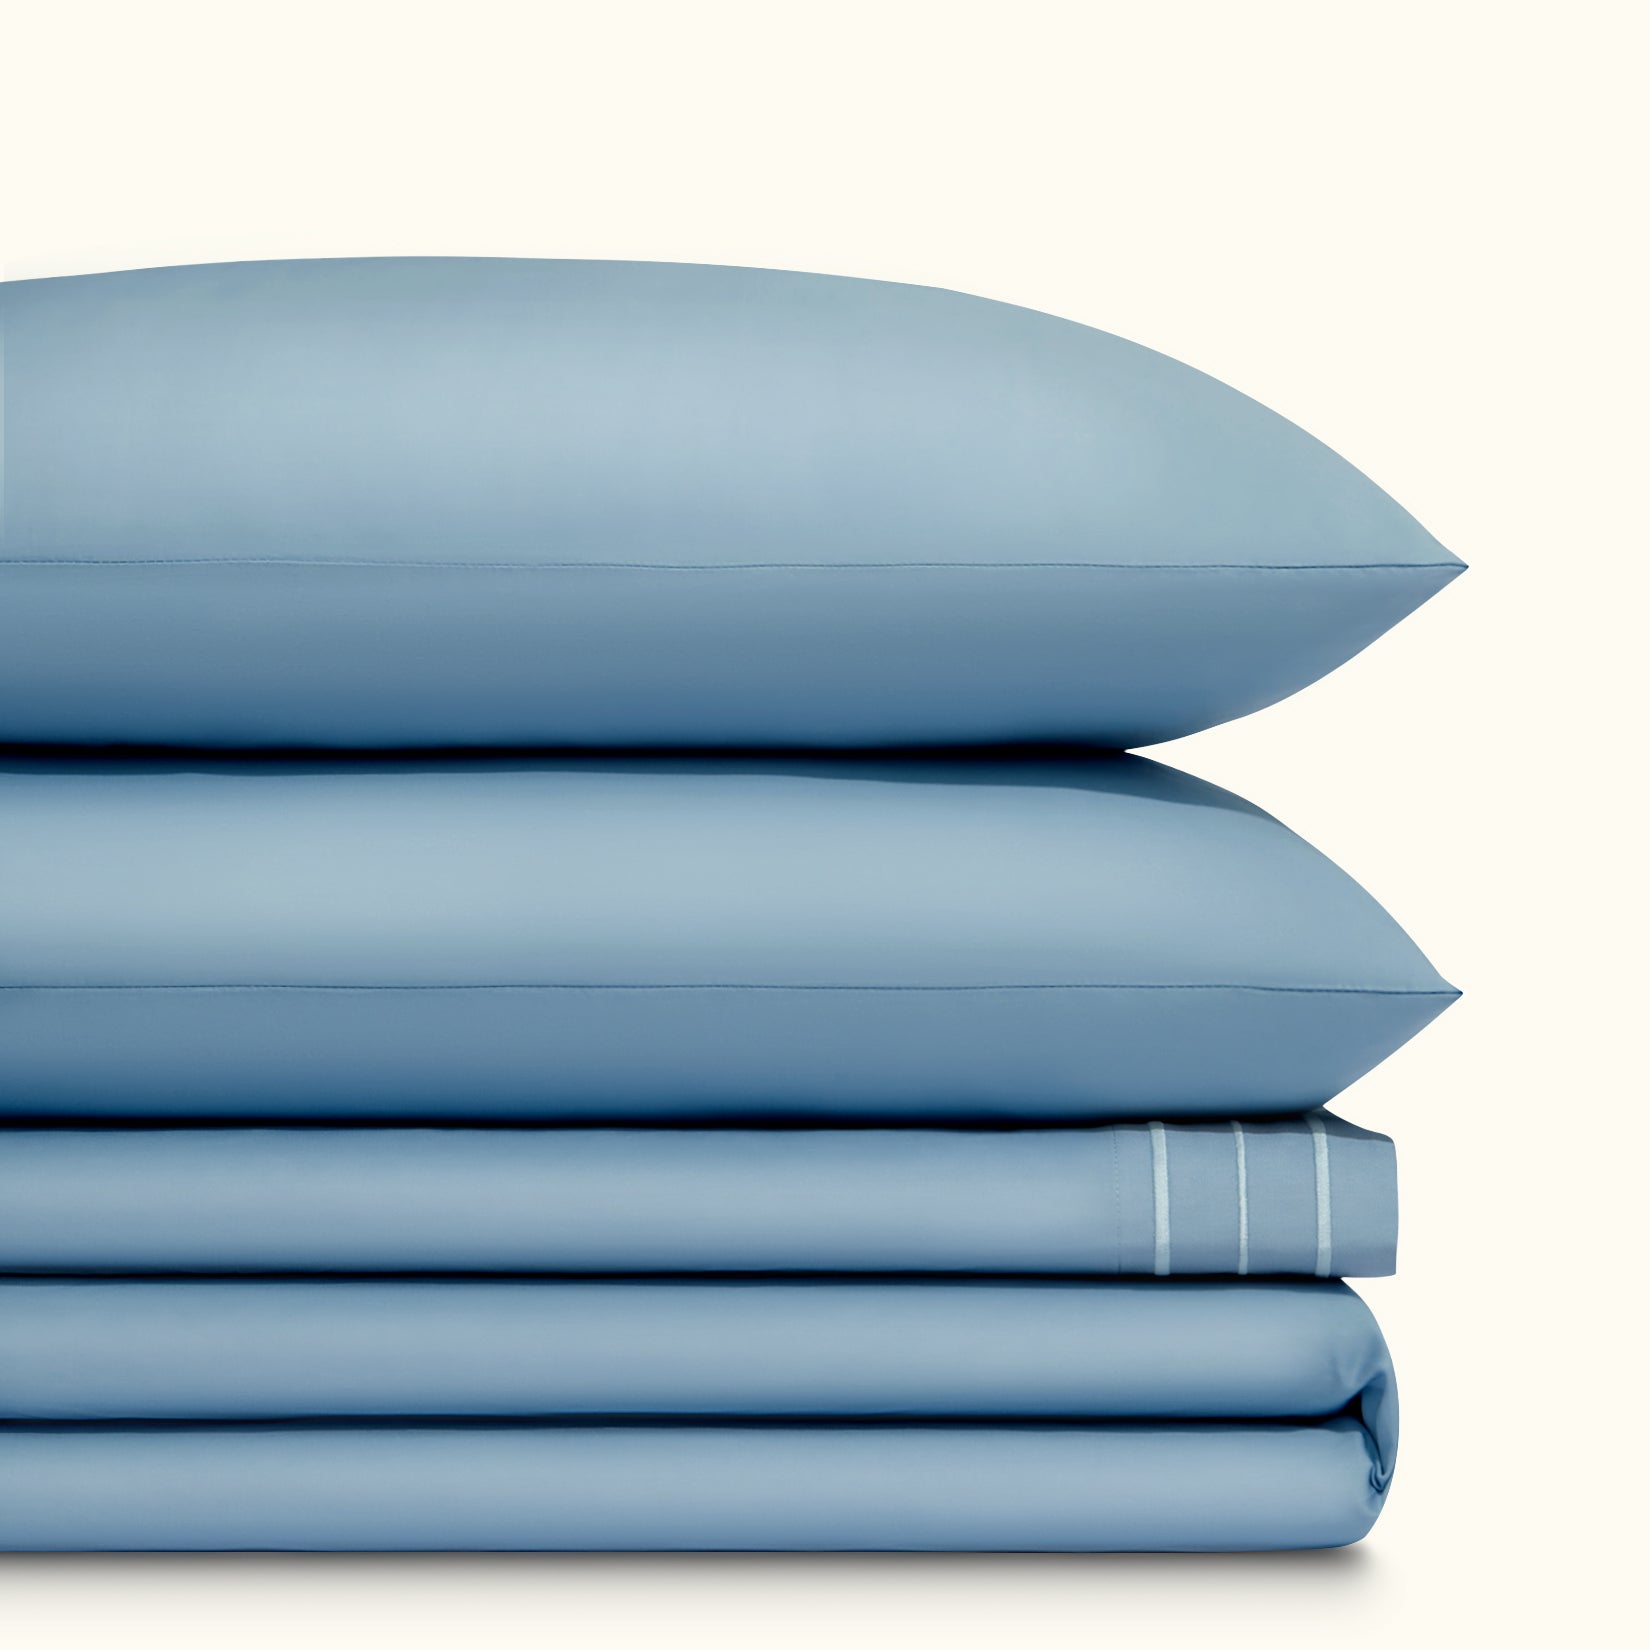 Paulina Sky Blue Satin Stitched Cuff 200 thread count cotton bed sheet set. Two sky blue pillows stacked on folded sky blue sheet set.